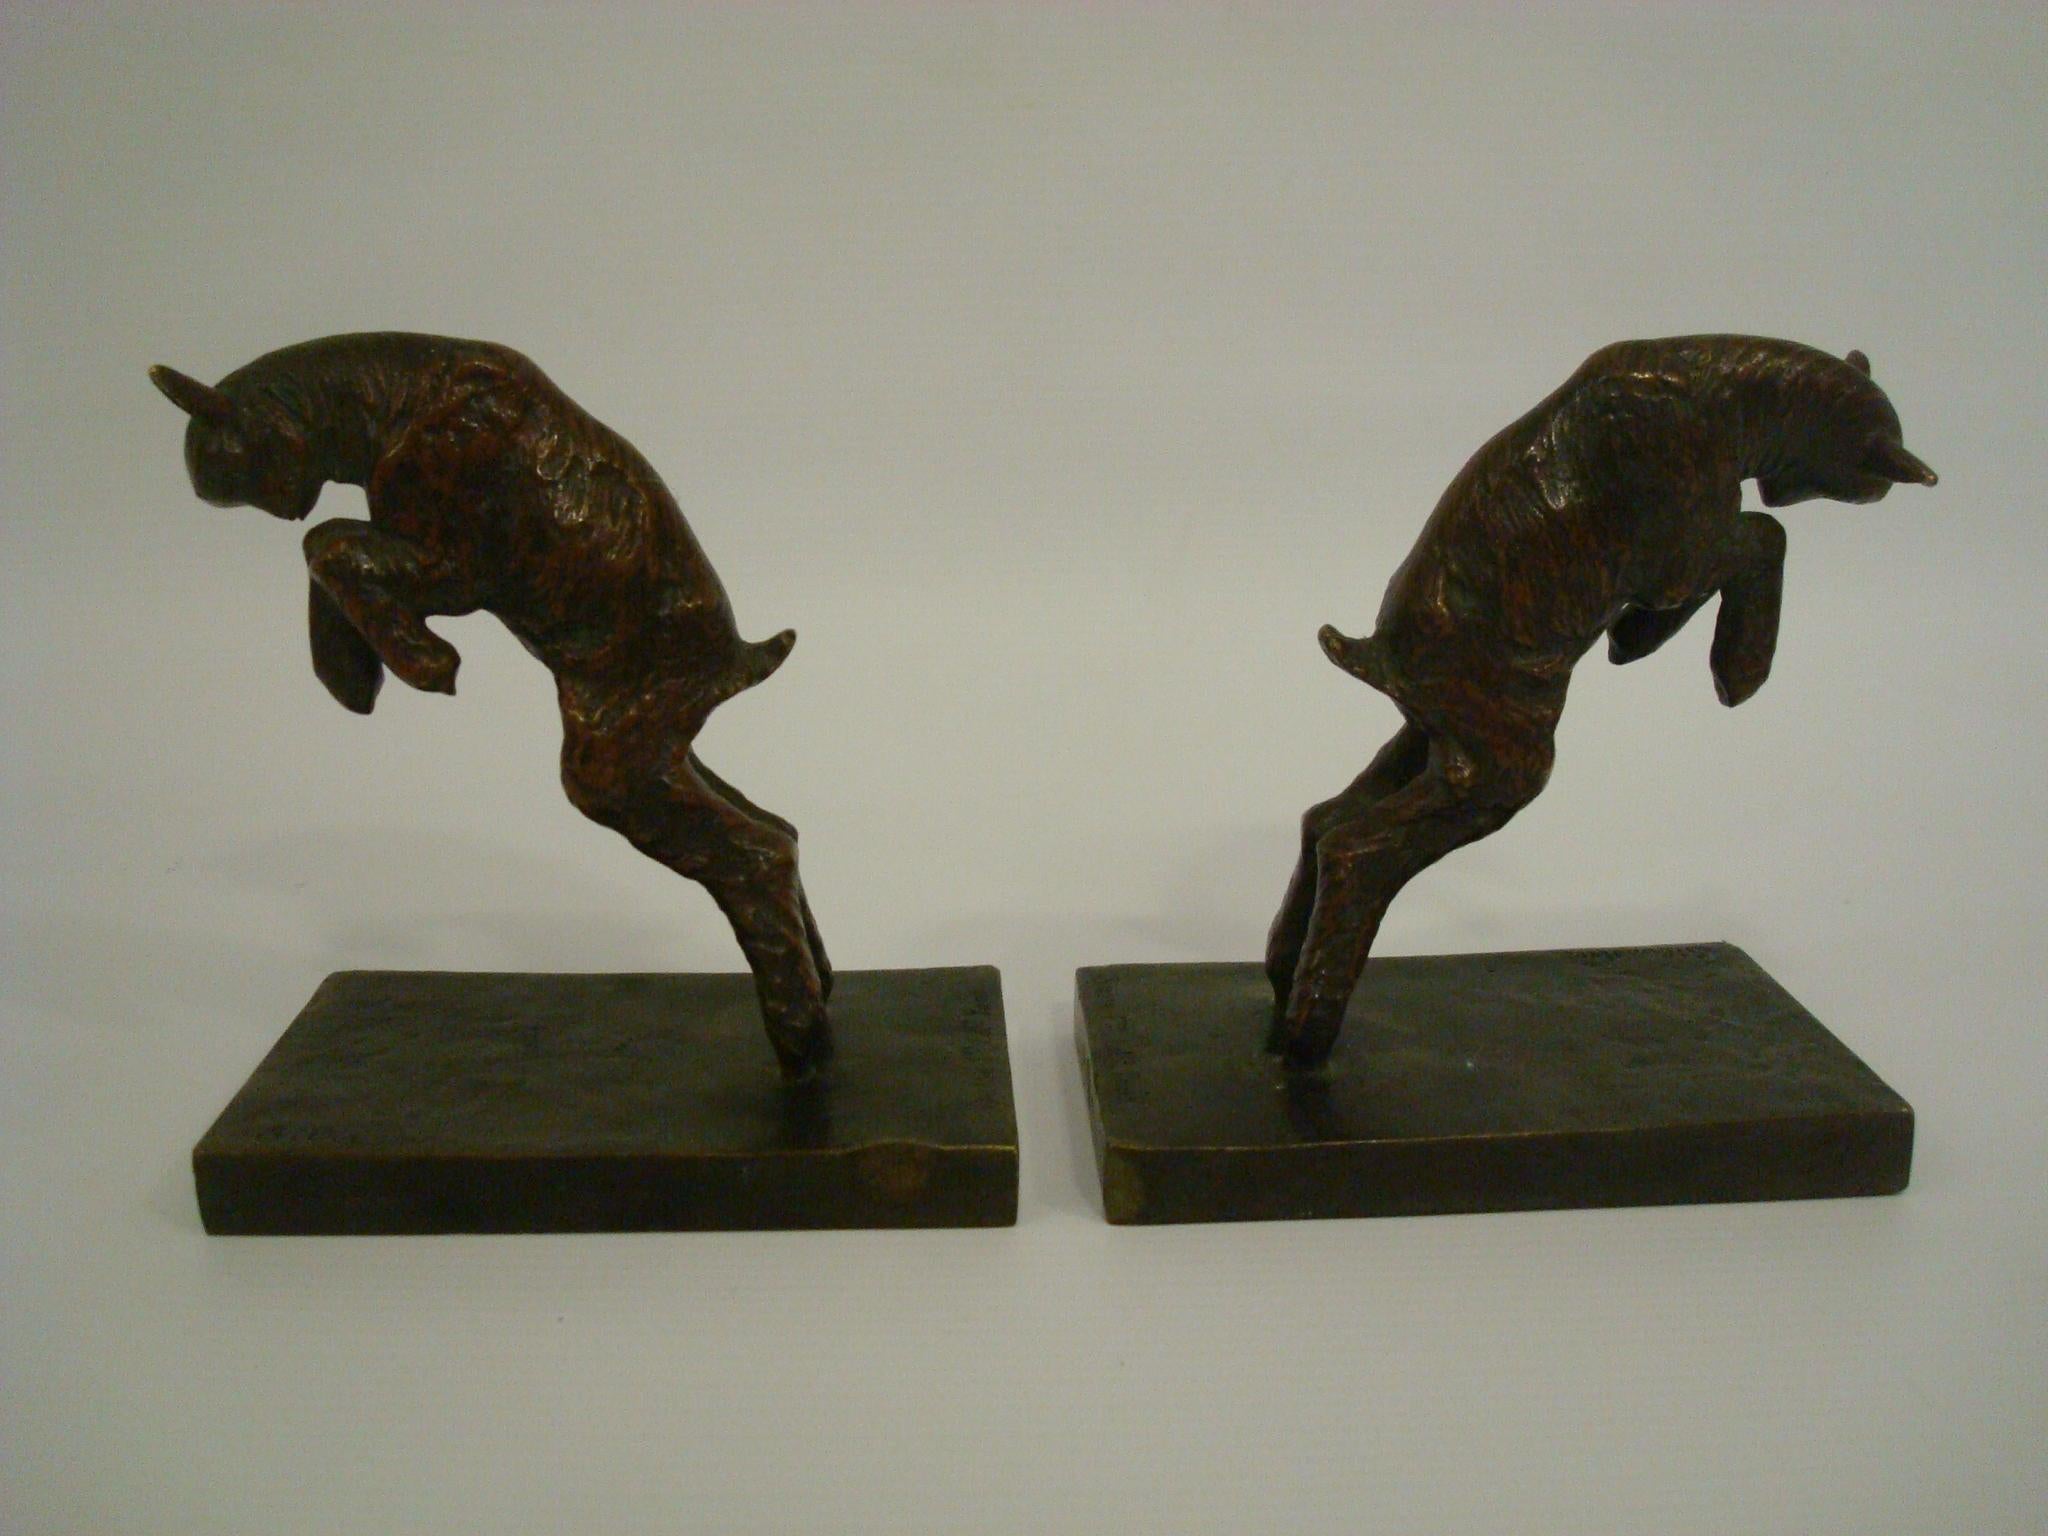 Art Deco bronze lamb bookends. Paul Silvestre.
Marked: Silvestre, foundry mark, Susse Frères, Paris.

Literature:
This model is illustrated in
